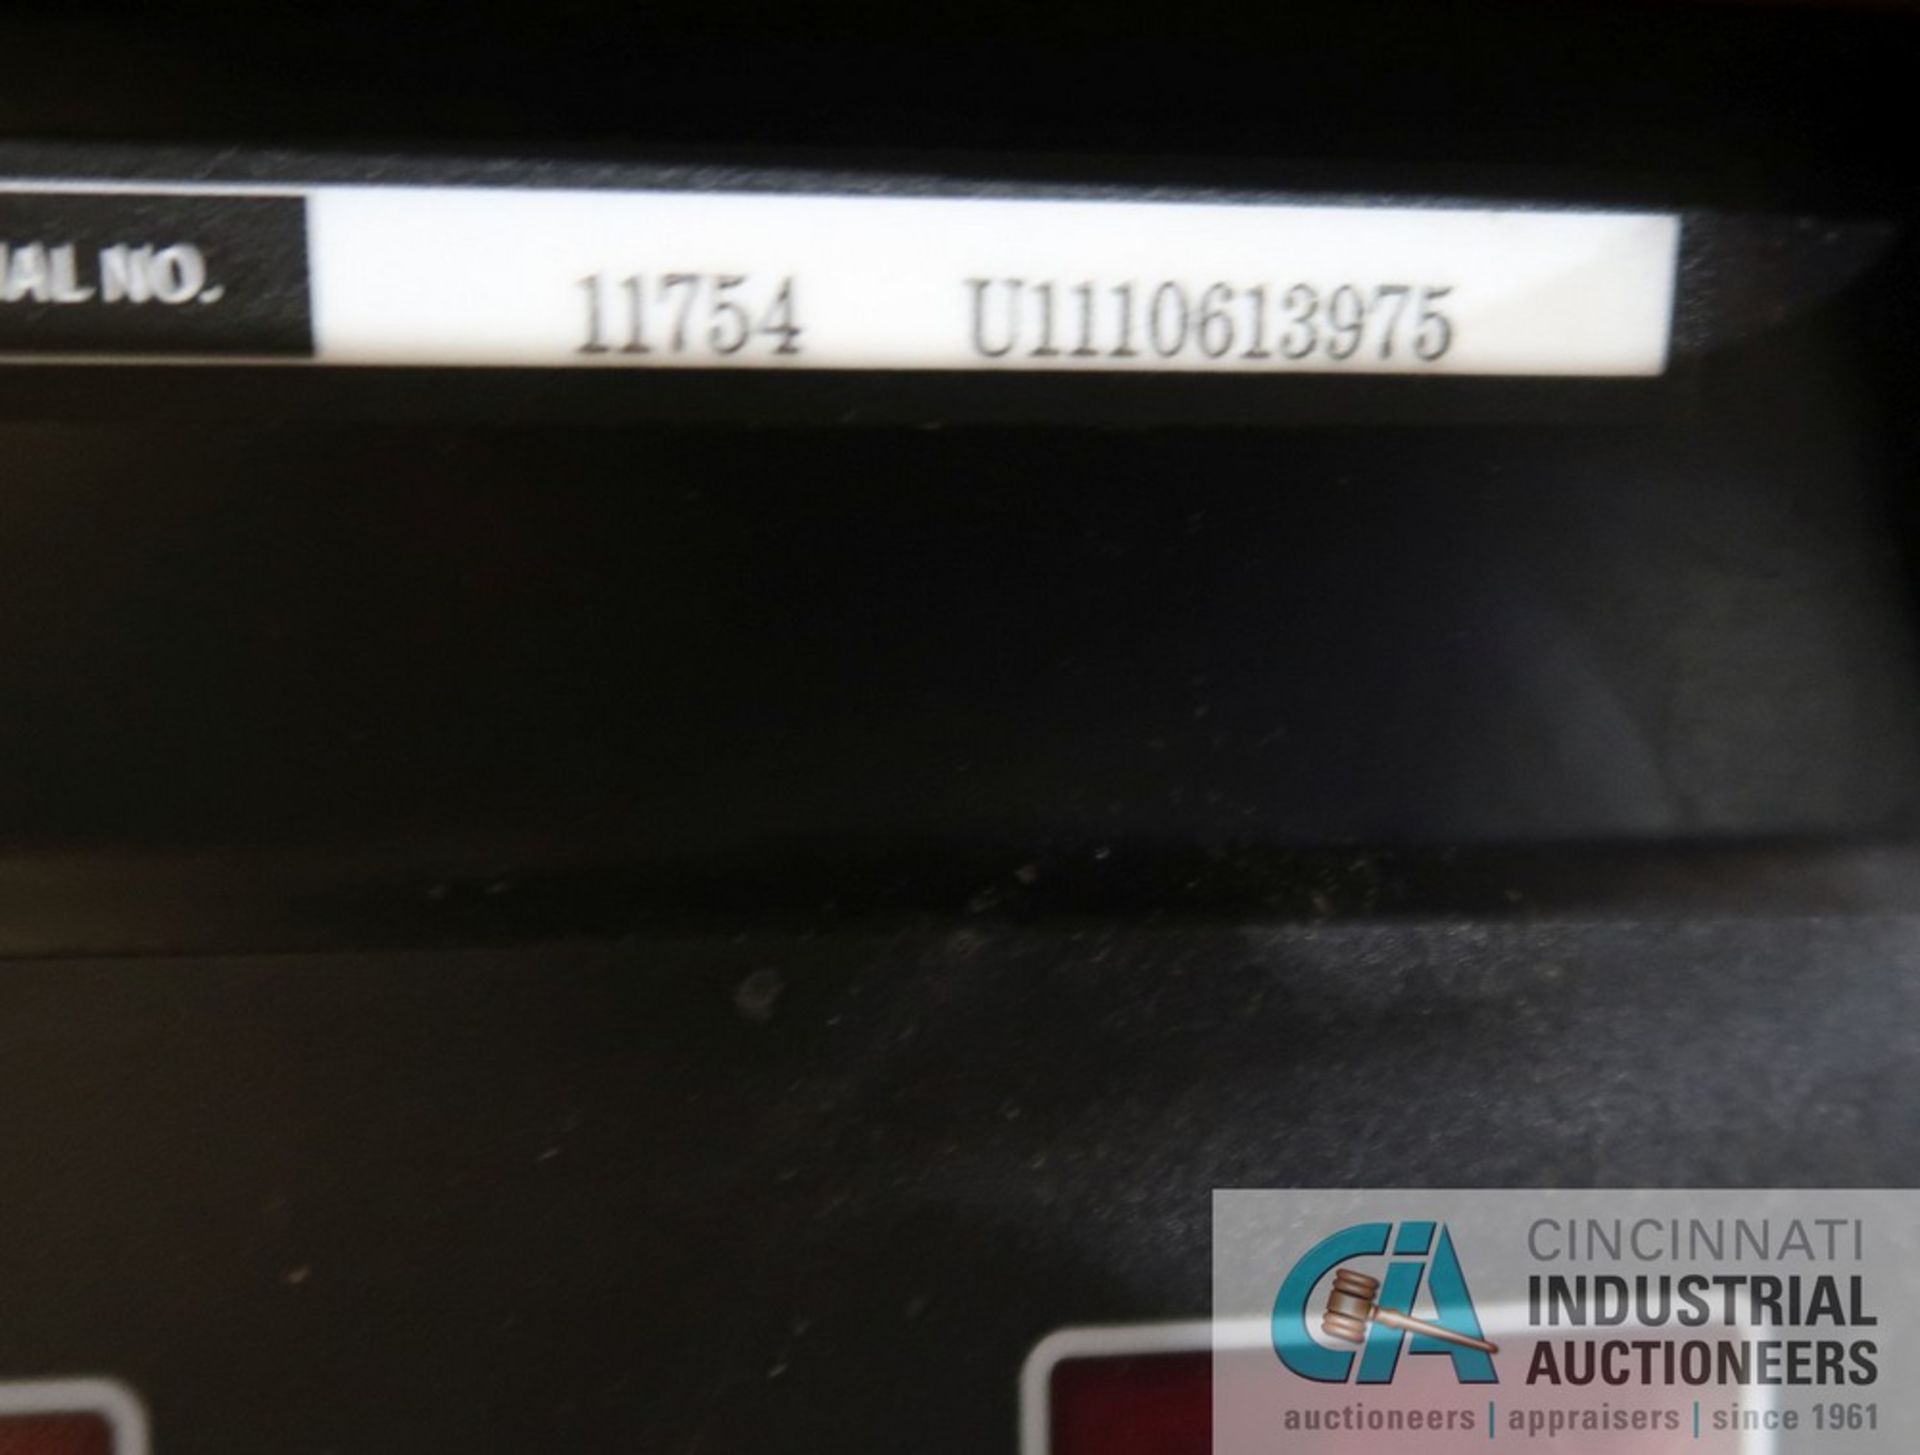 450 AMP LINCOLN ELECTRIC FLEXTEC 450 WELDING POWER SOURCE S/N U110613975 WITH LINCOLN ELECTRIC MODEL - Image 4 of 8